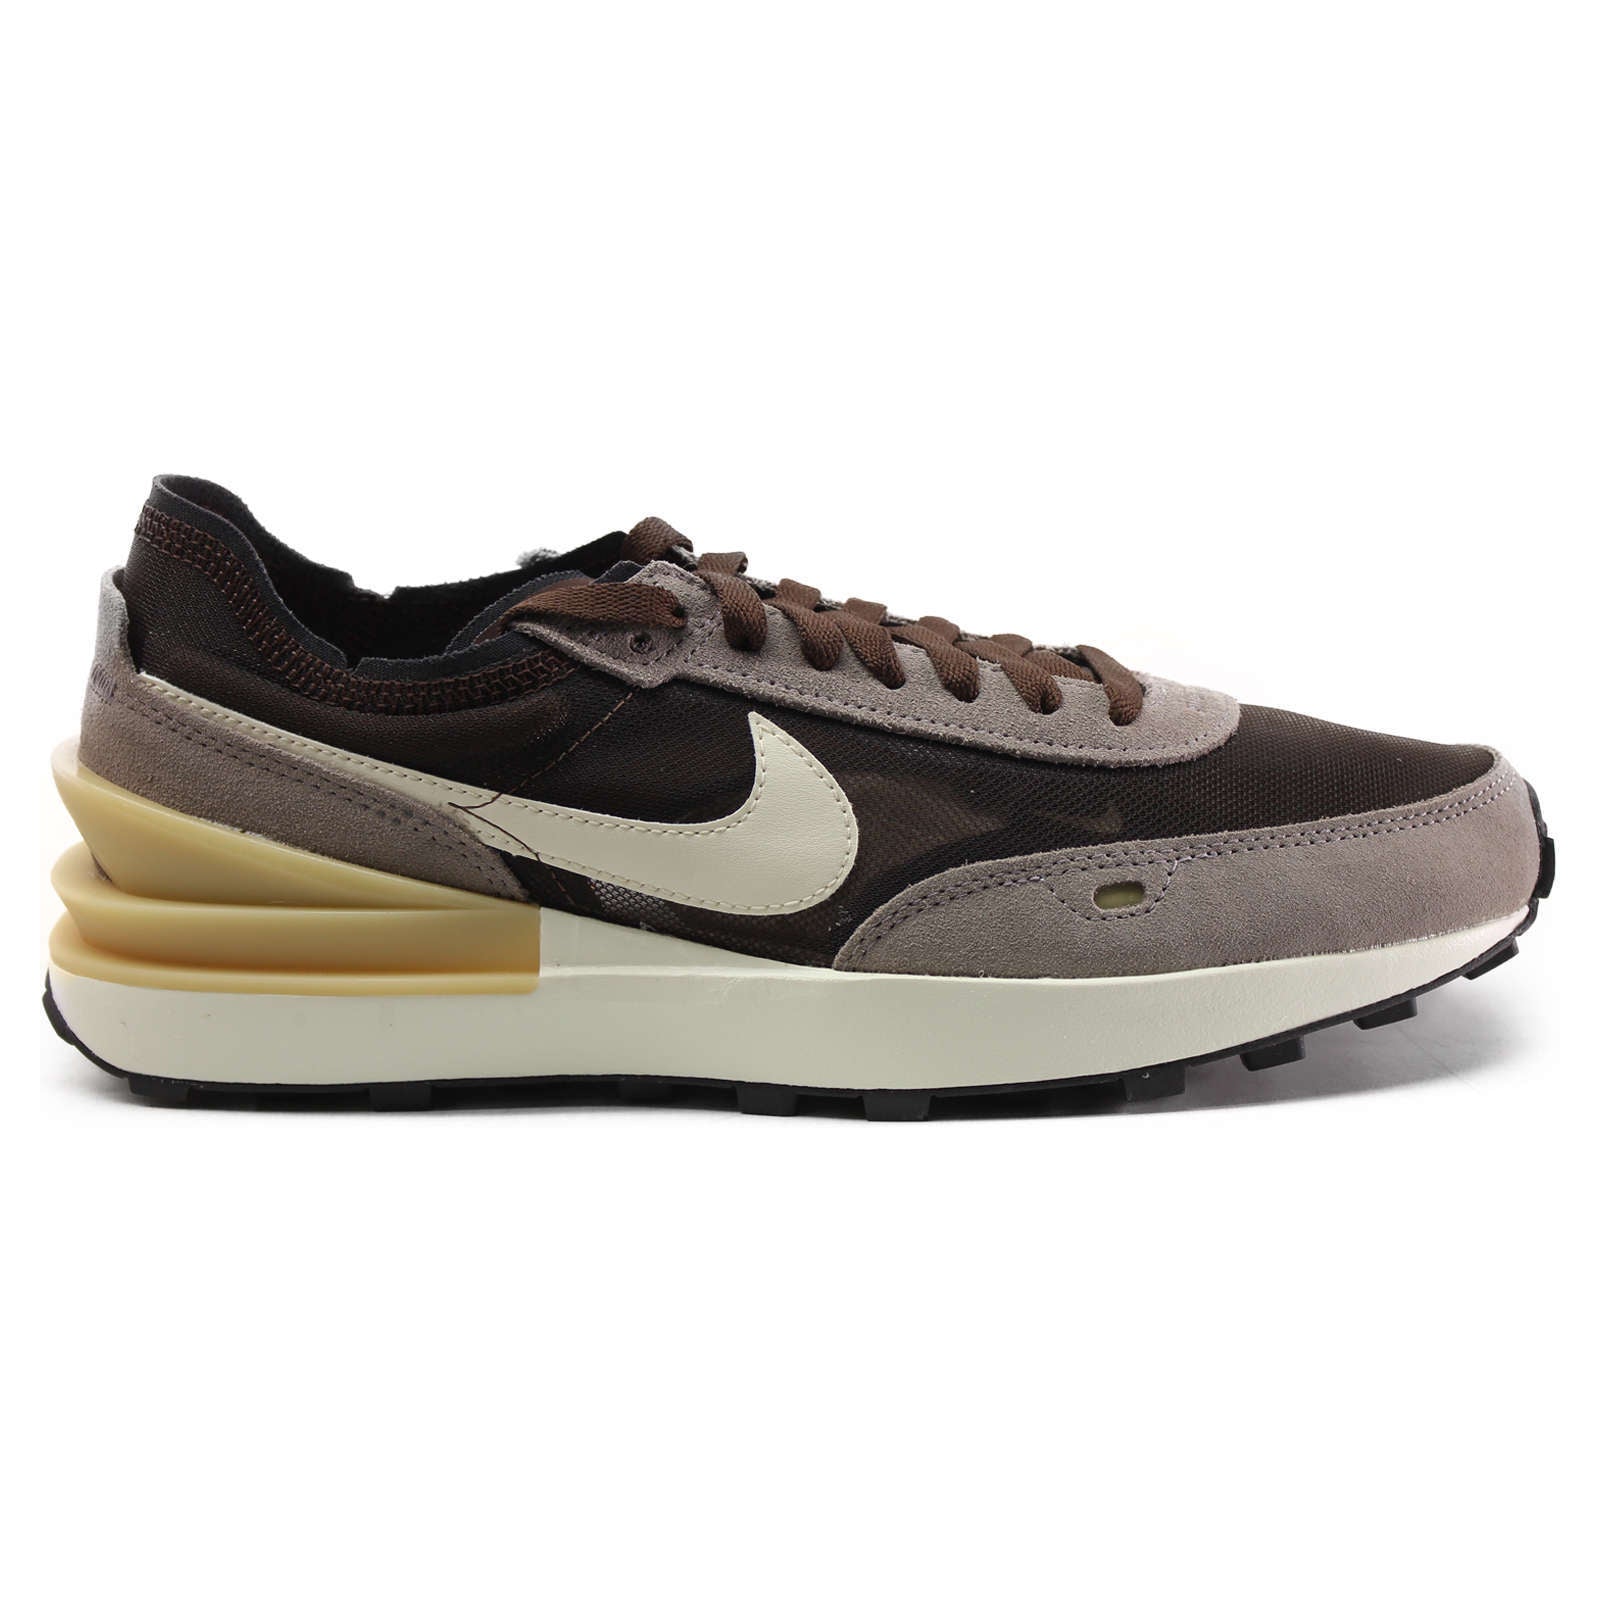 Nike Waffle One Leather Textile Men's Low-Top Trainers#color_light chocolate natural